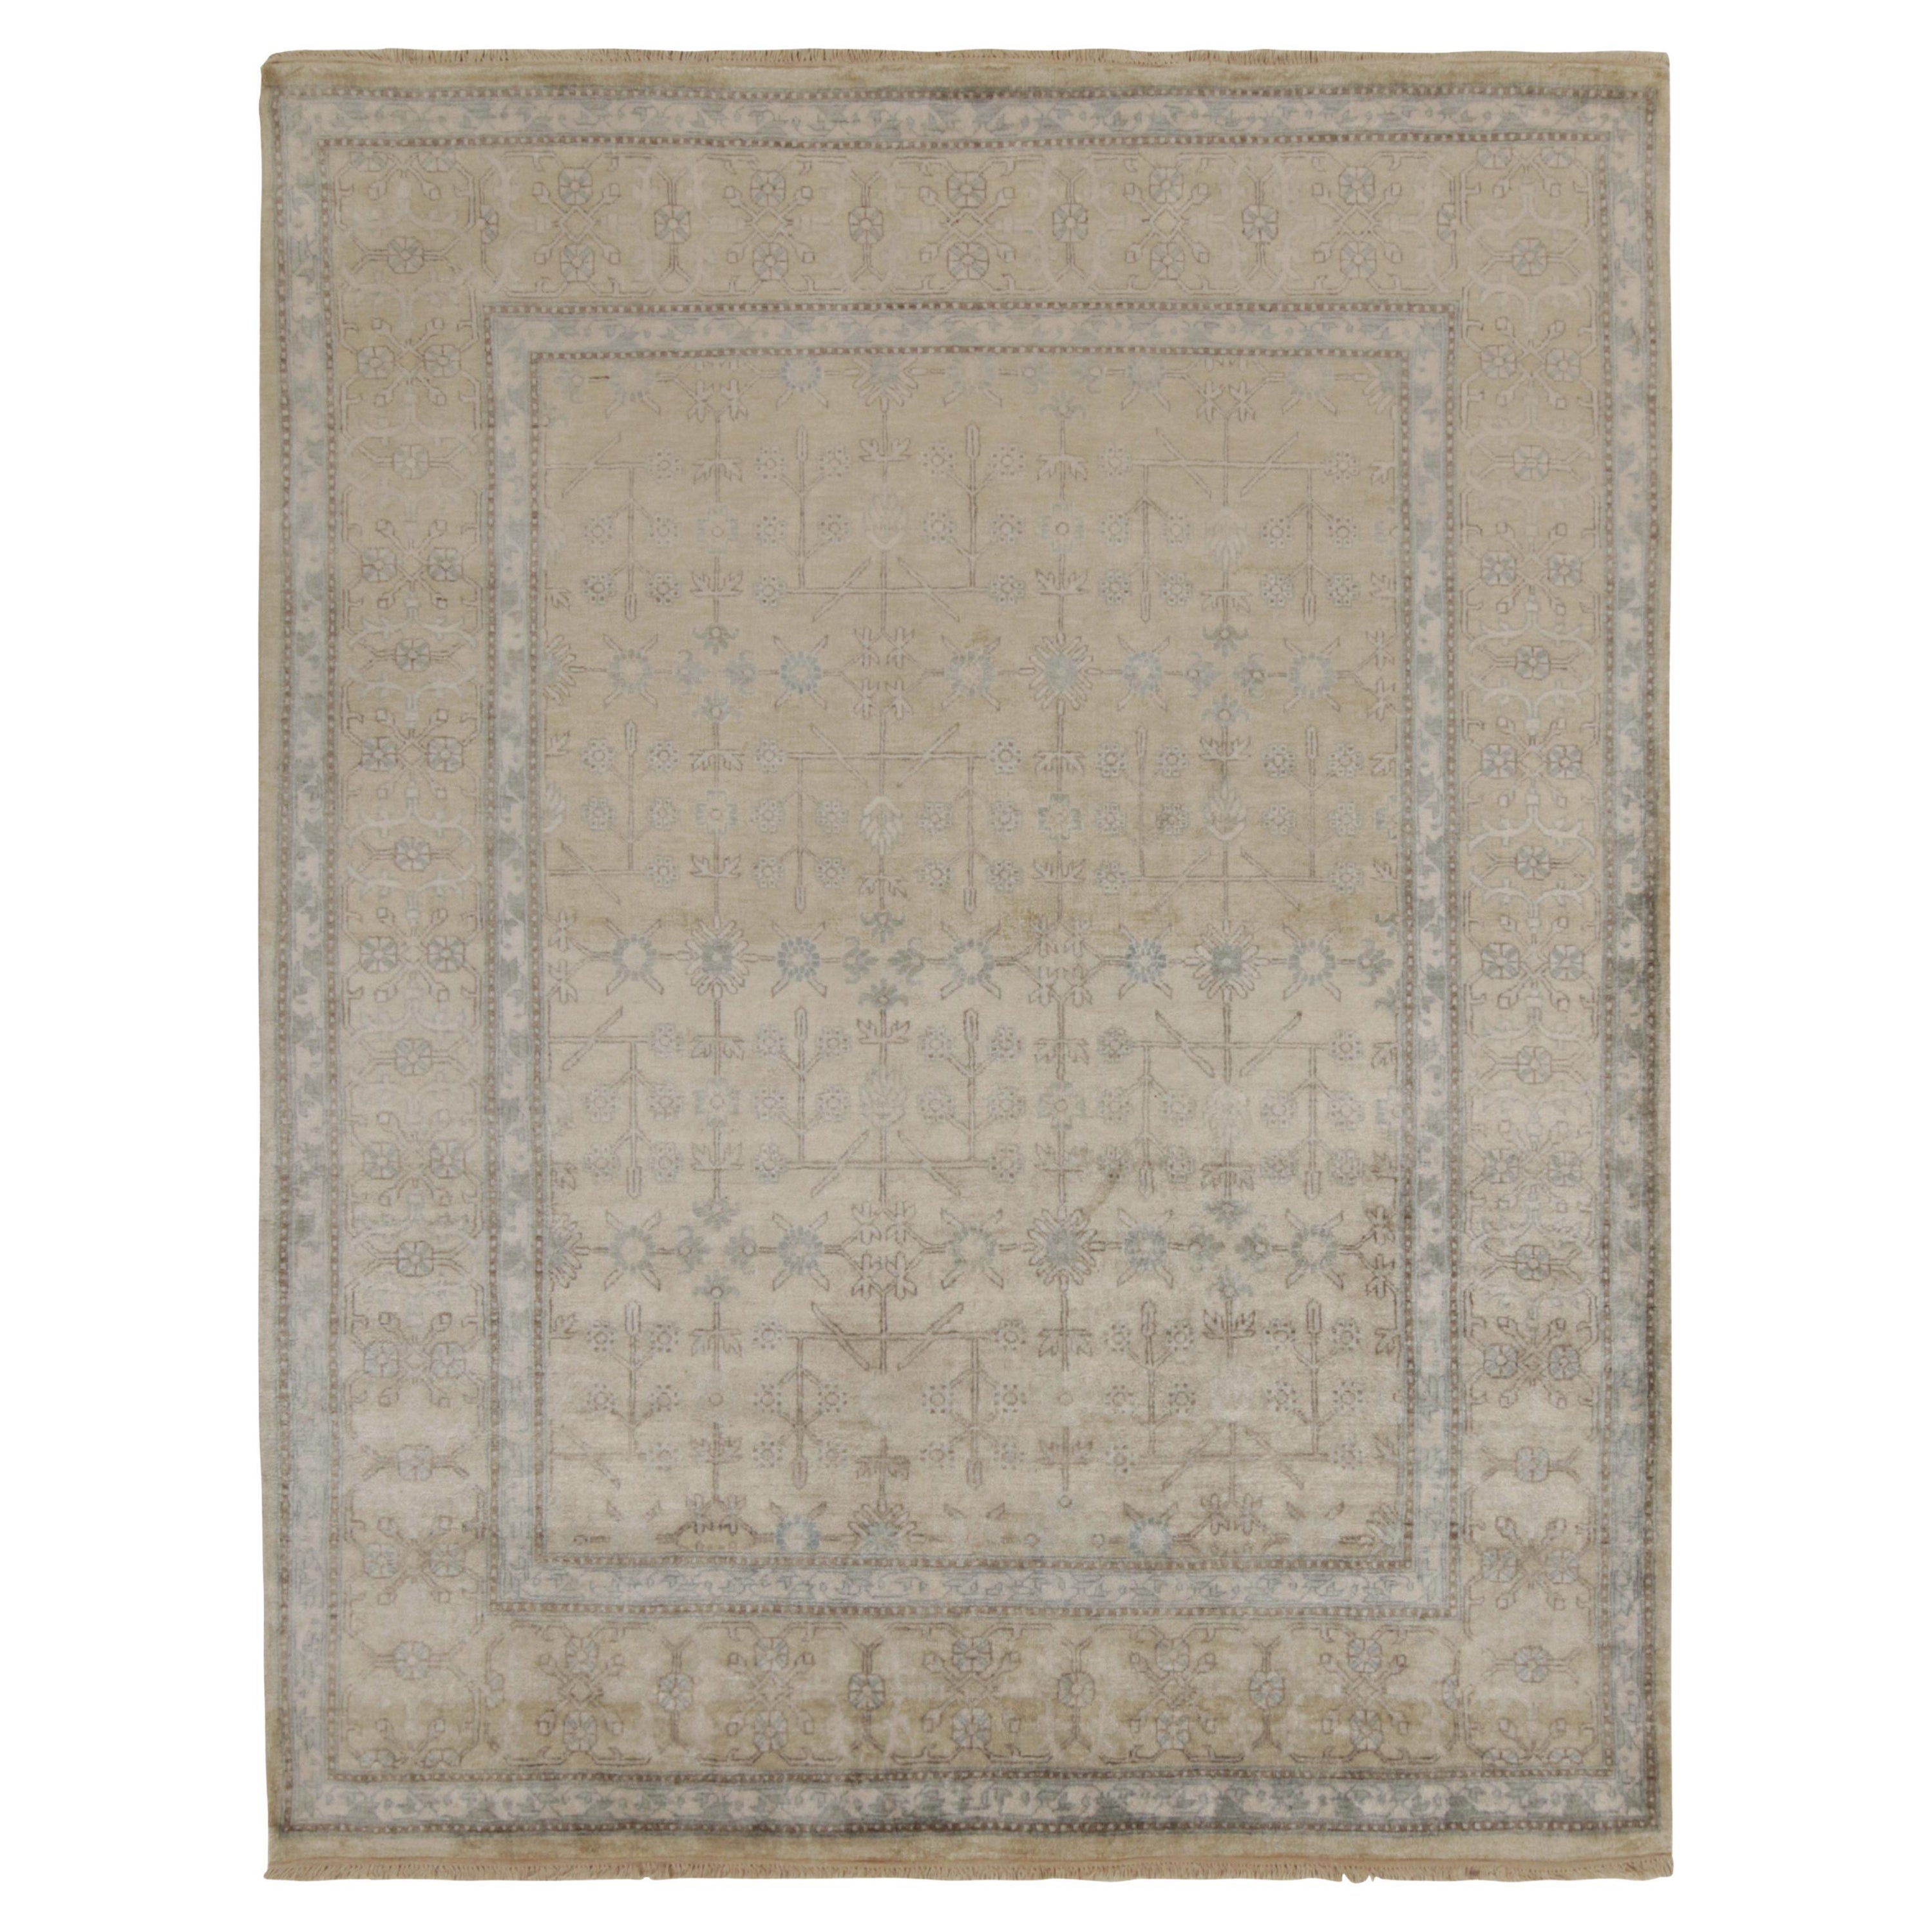 Rug & Kilim’s Khotan style Rug in Ivory with White & Blue Floral Patterns For Sale